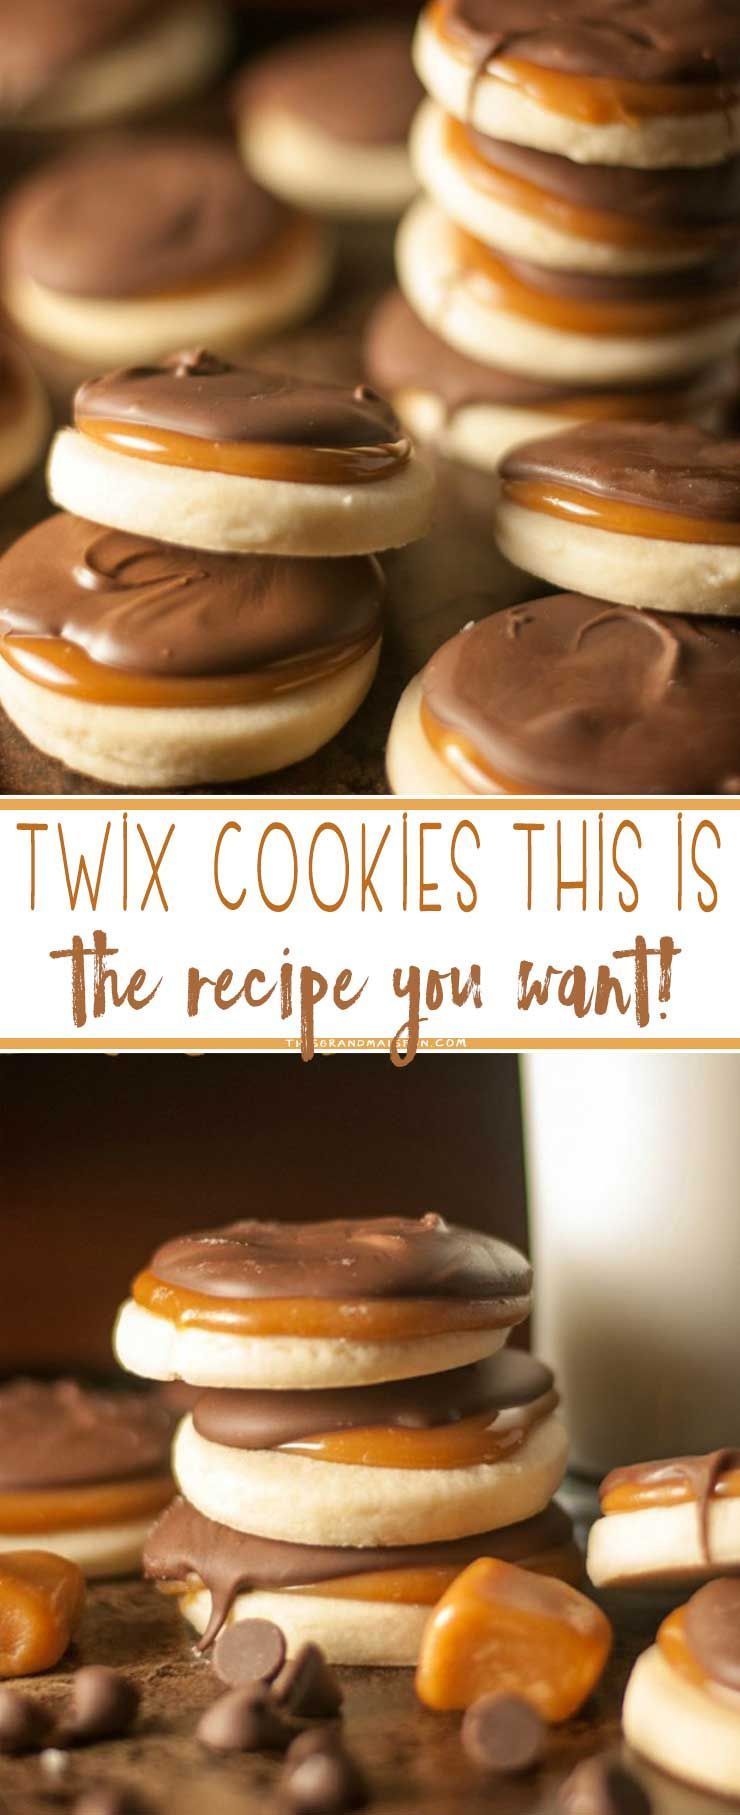 Twix Cookies. Made with a buttery, flaky shortbread base then add some caramel and top with chocolate, these cookies are bound to